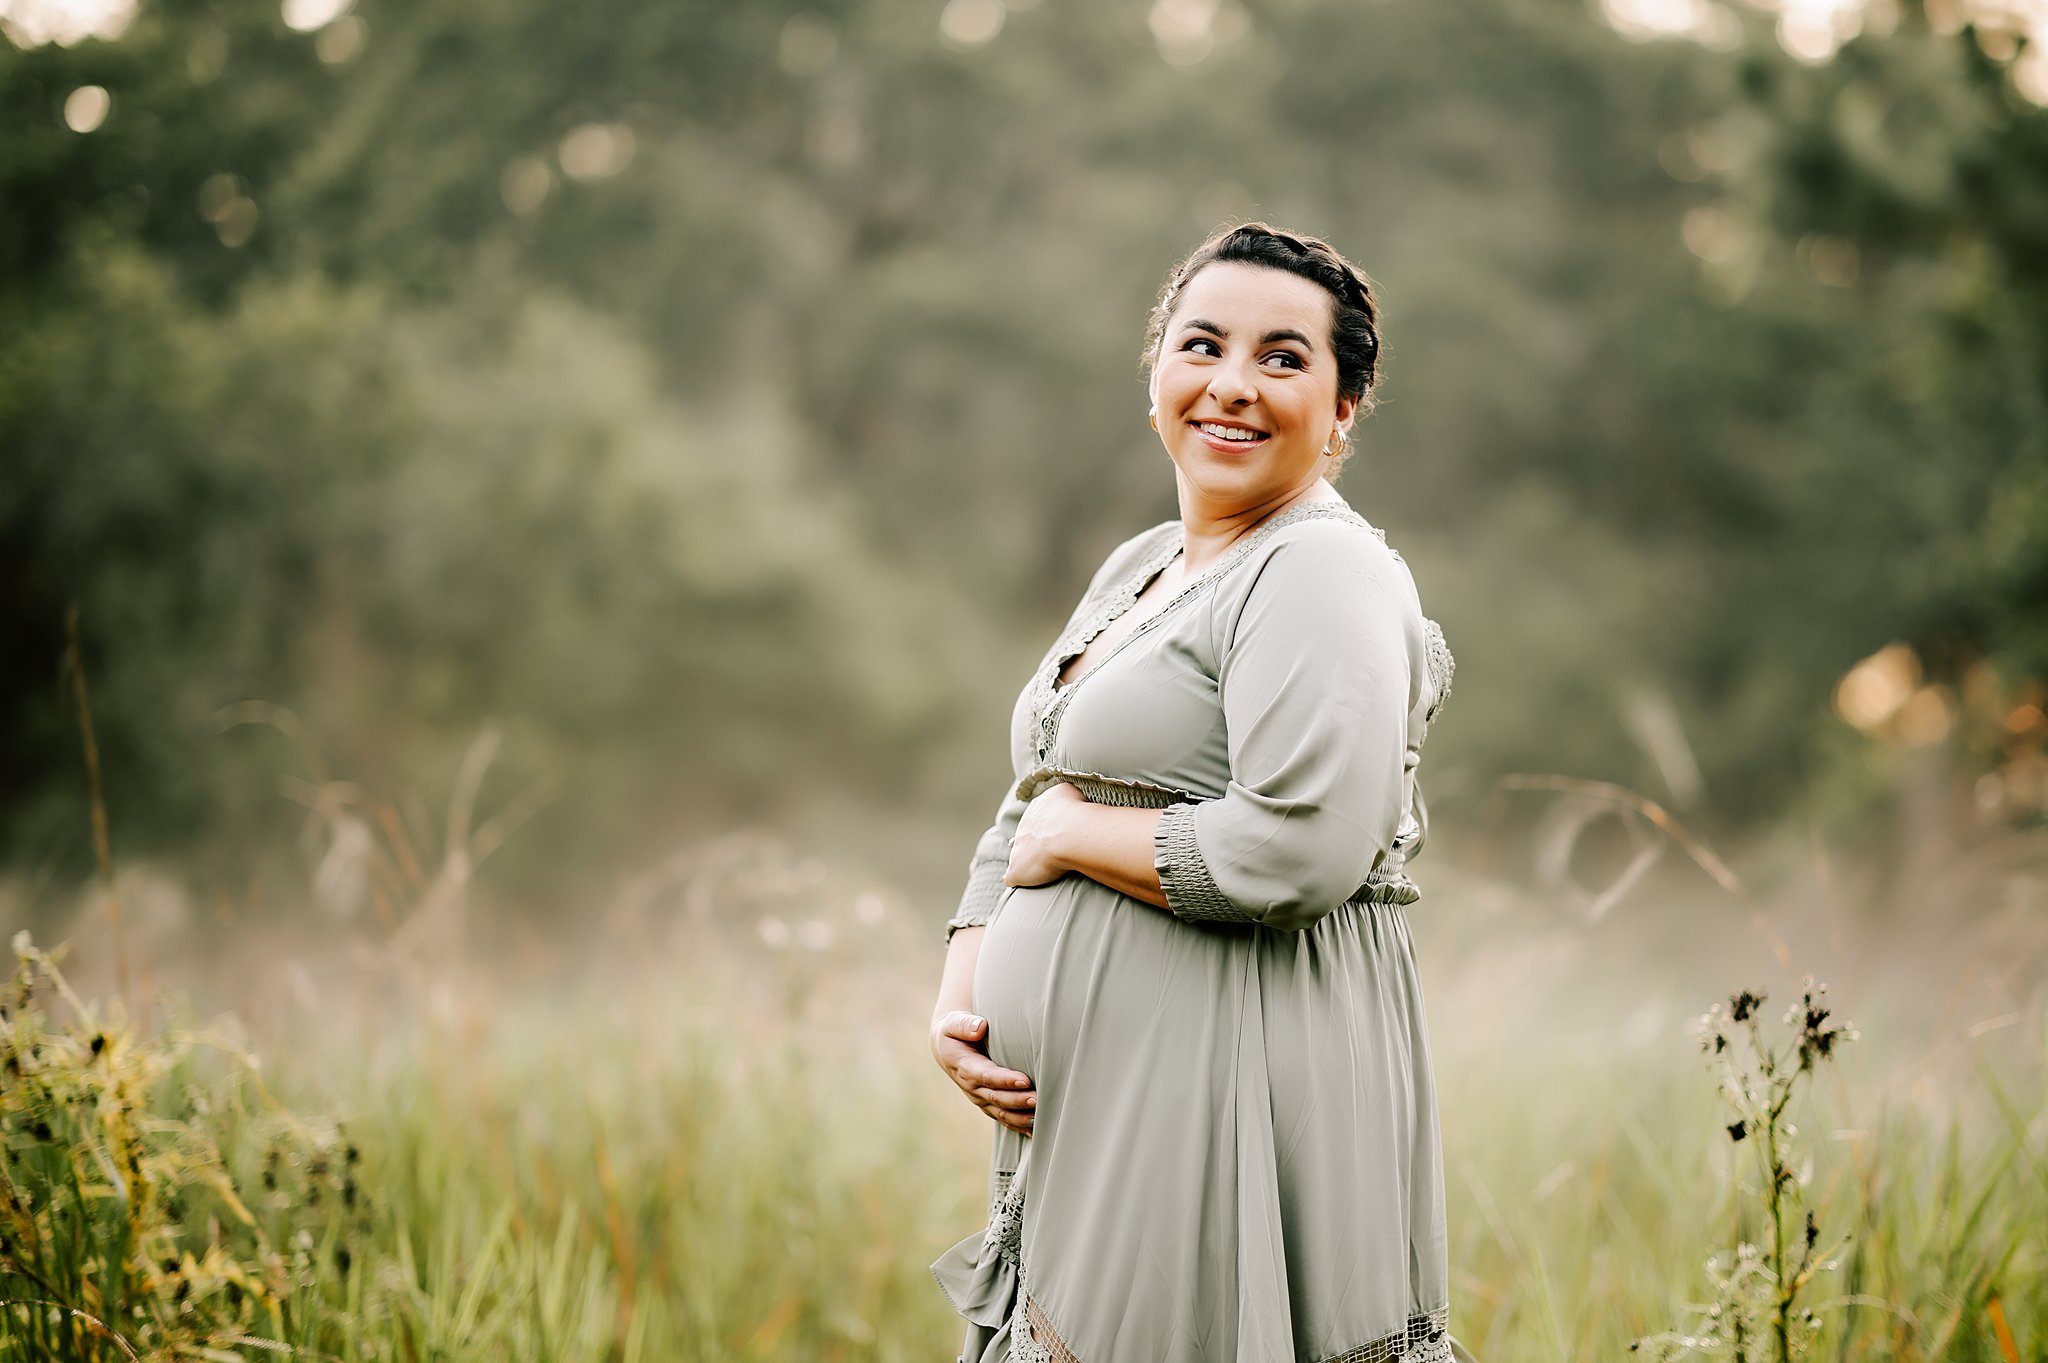 A mom to be looks over her shoulder holding her bump in a park